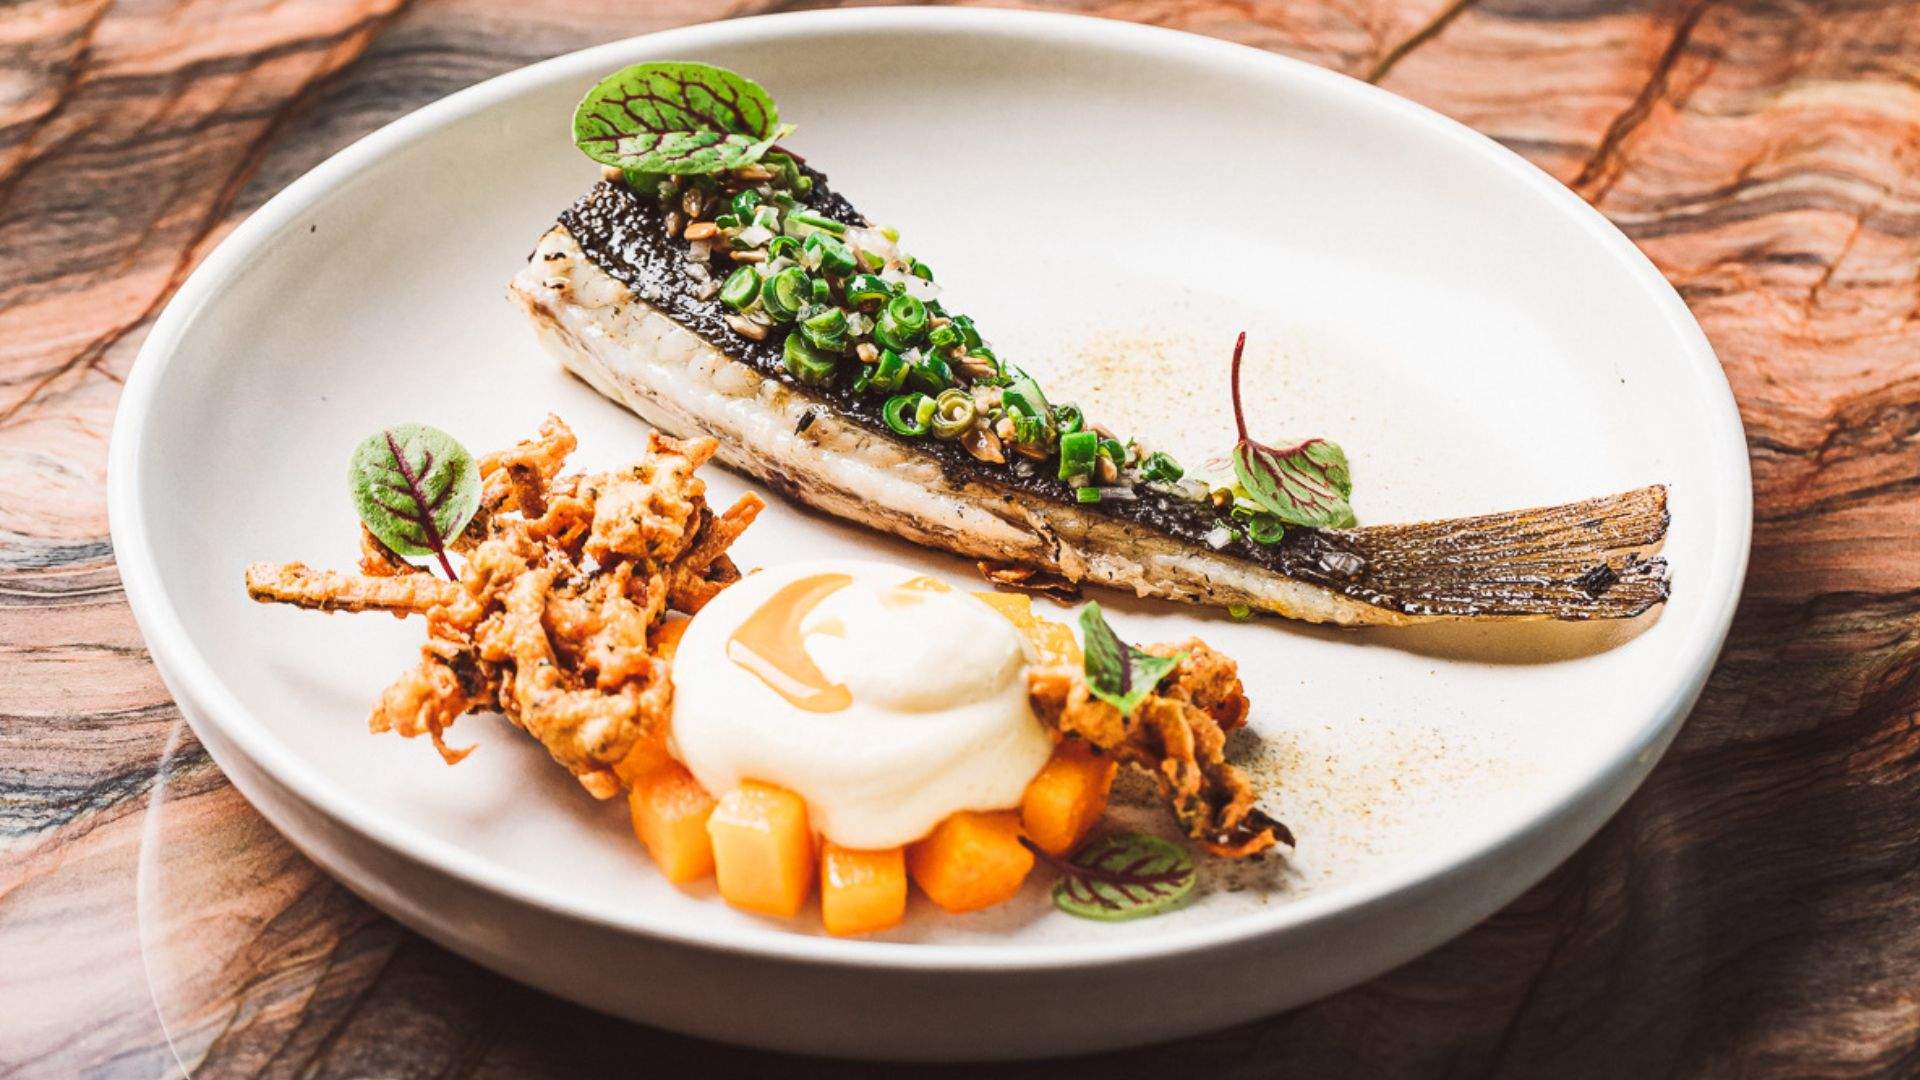 Auckland Restaurant Month Returns This August with Speciality Menus, Masterclasses and Events